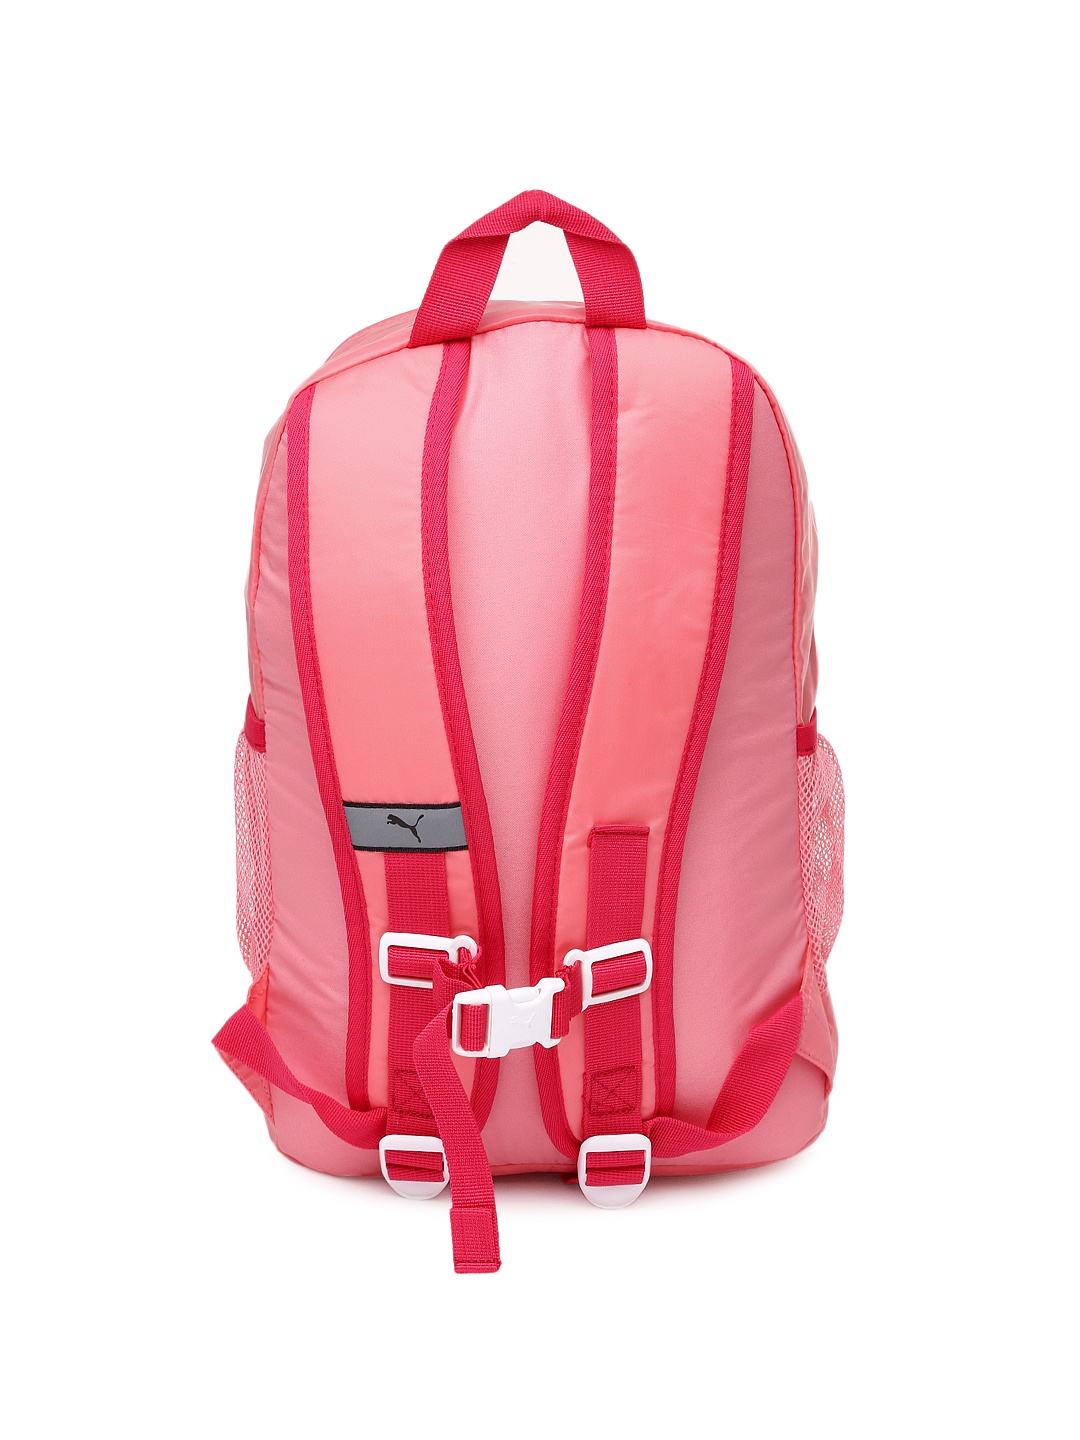 Outdoors Backpack